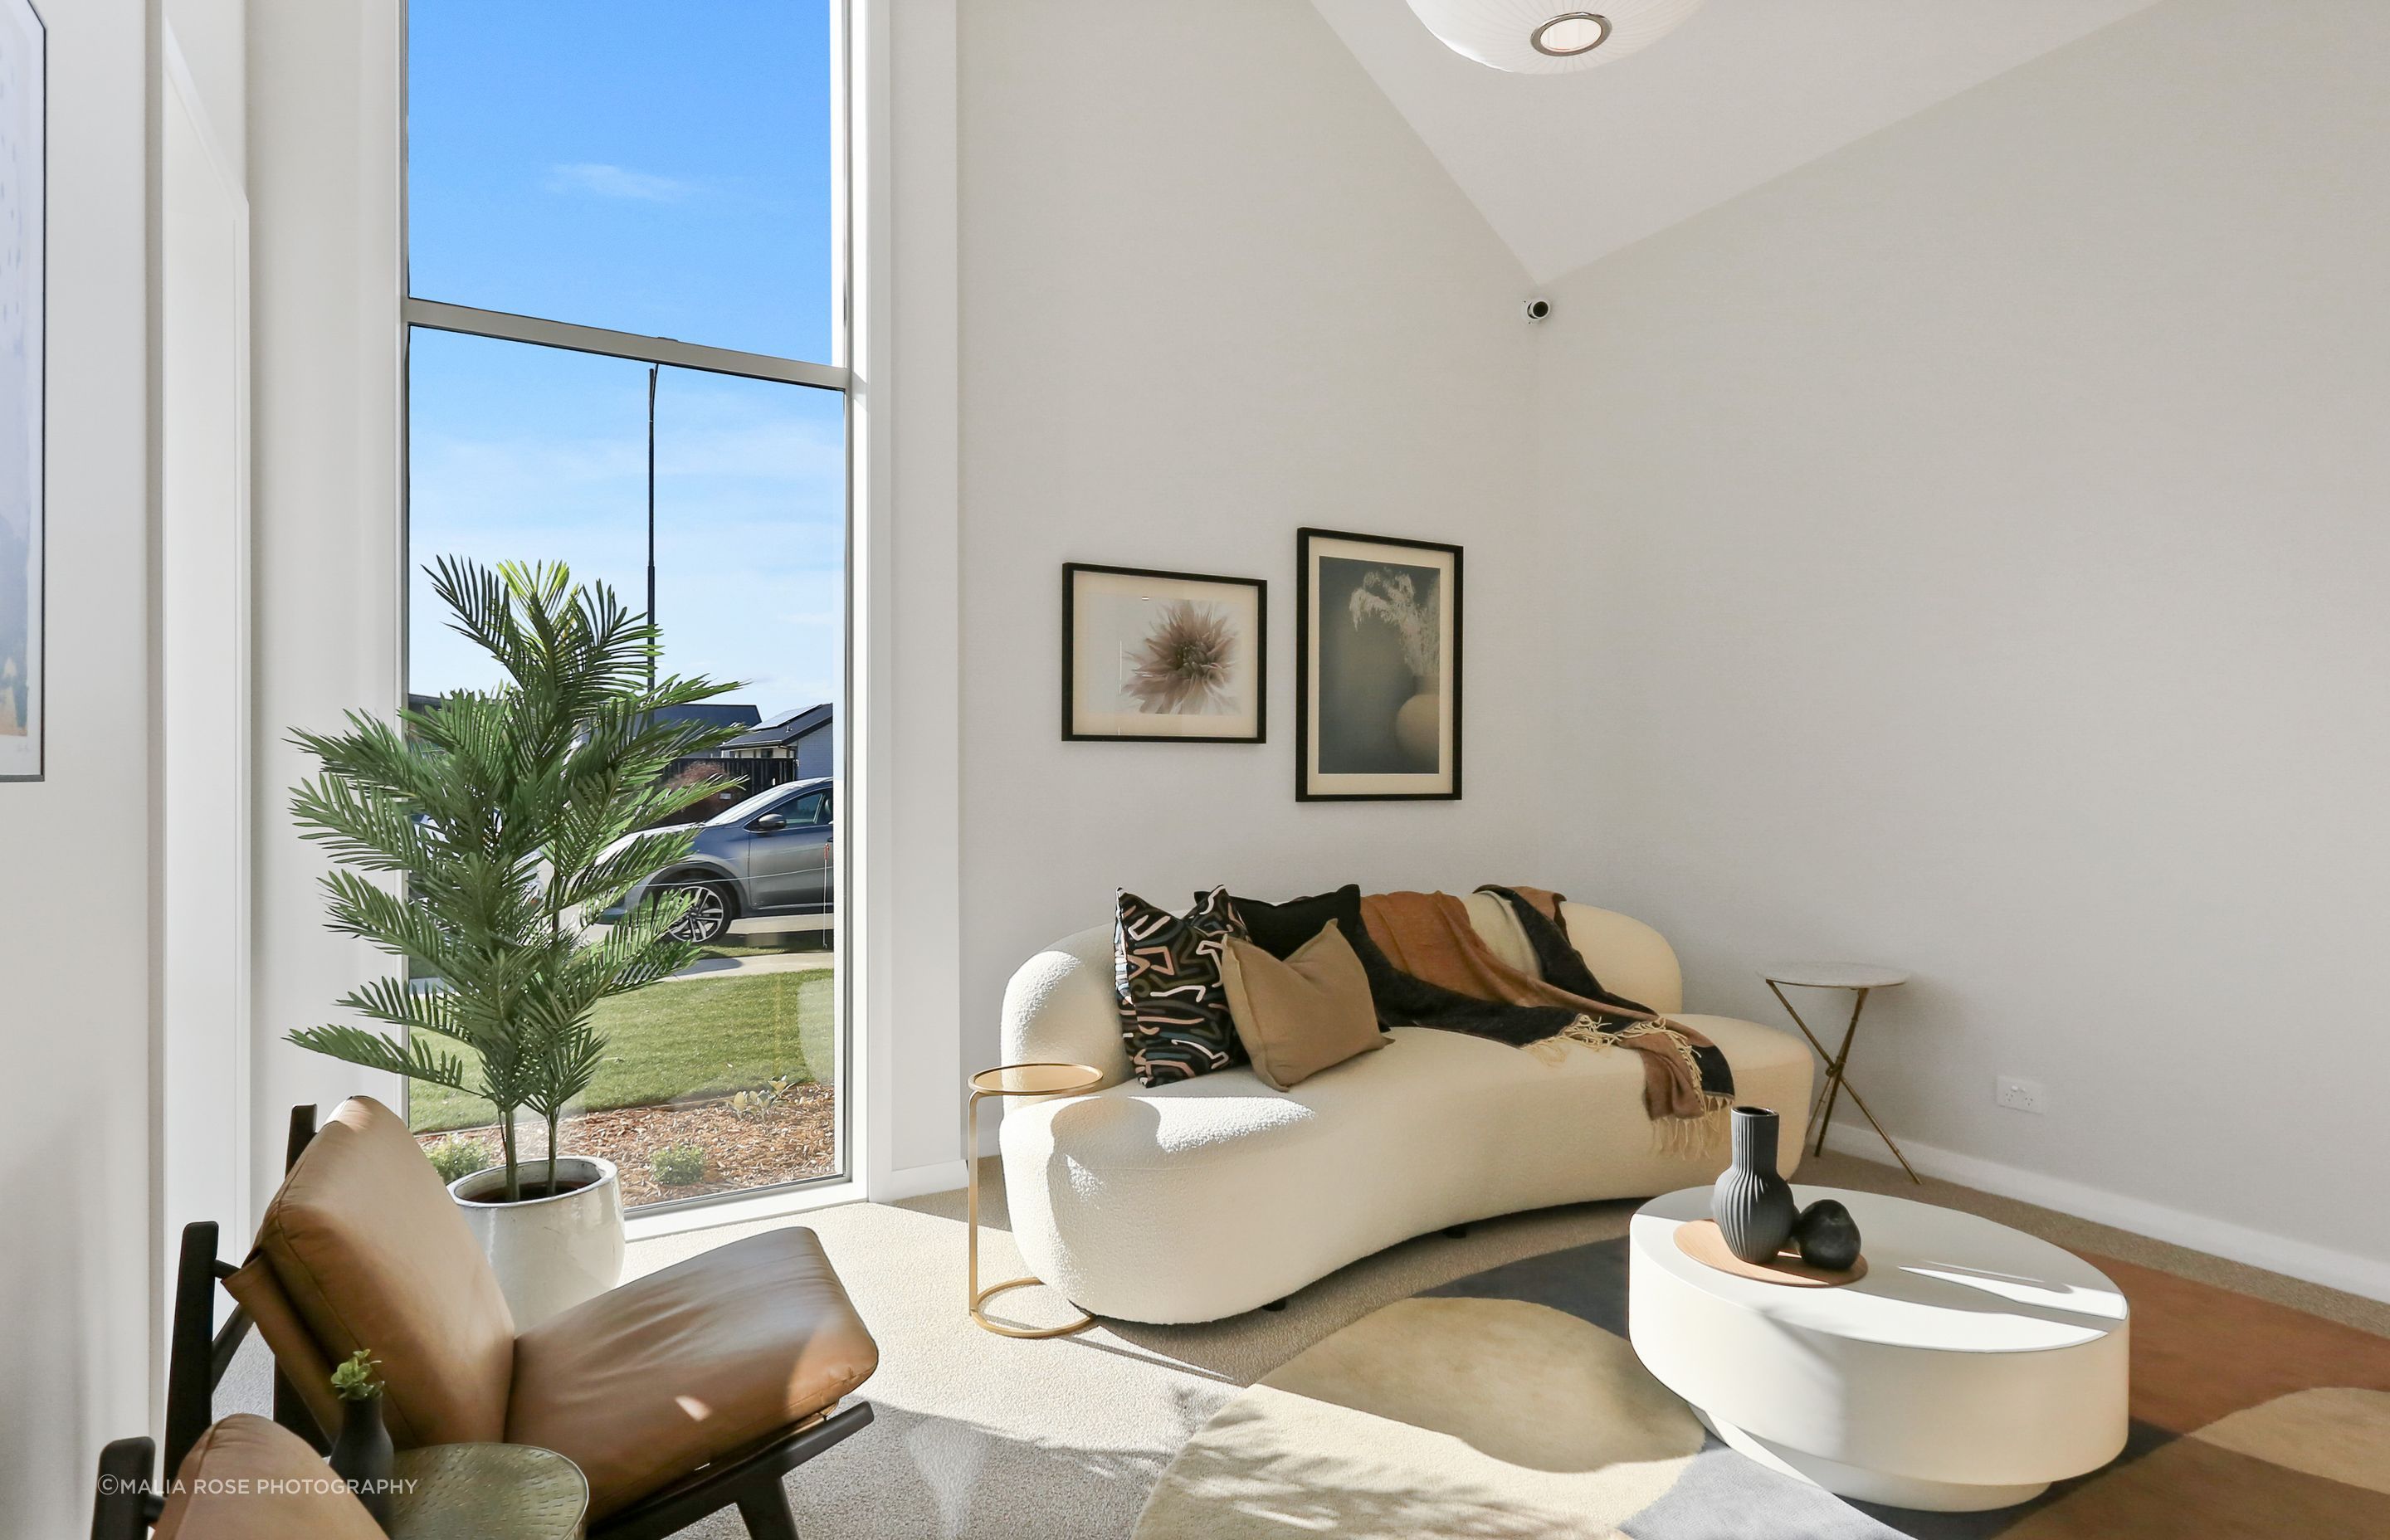 Our Cardrona Showhome is a "feast for the eyes"